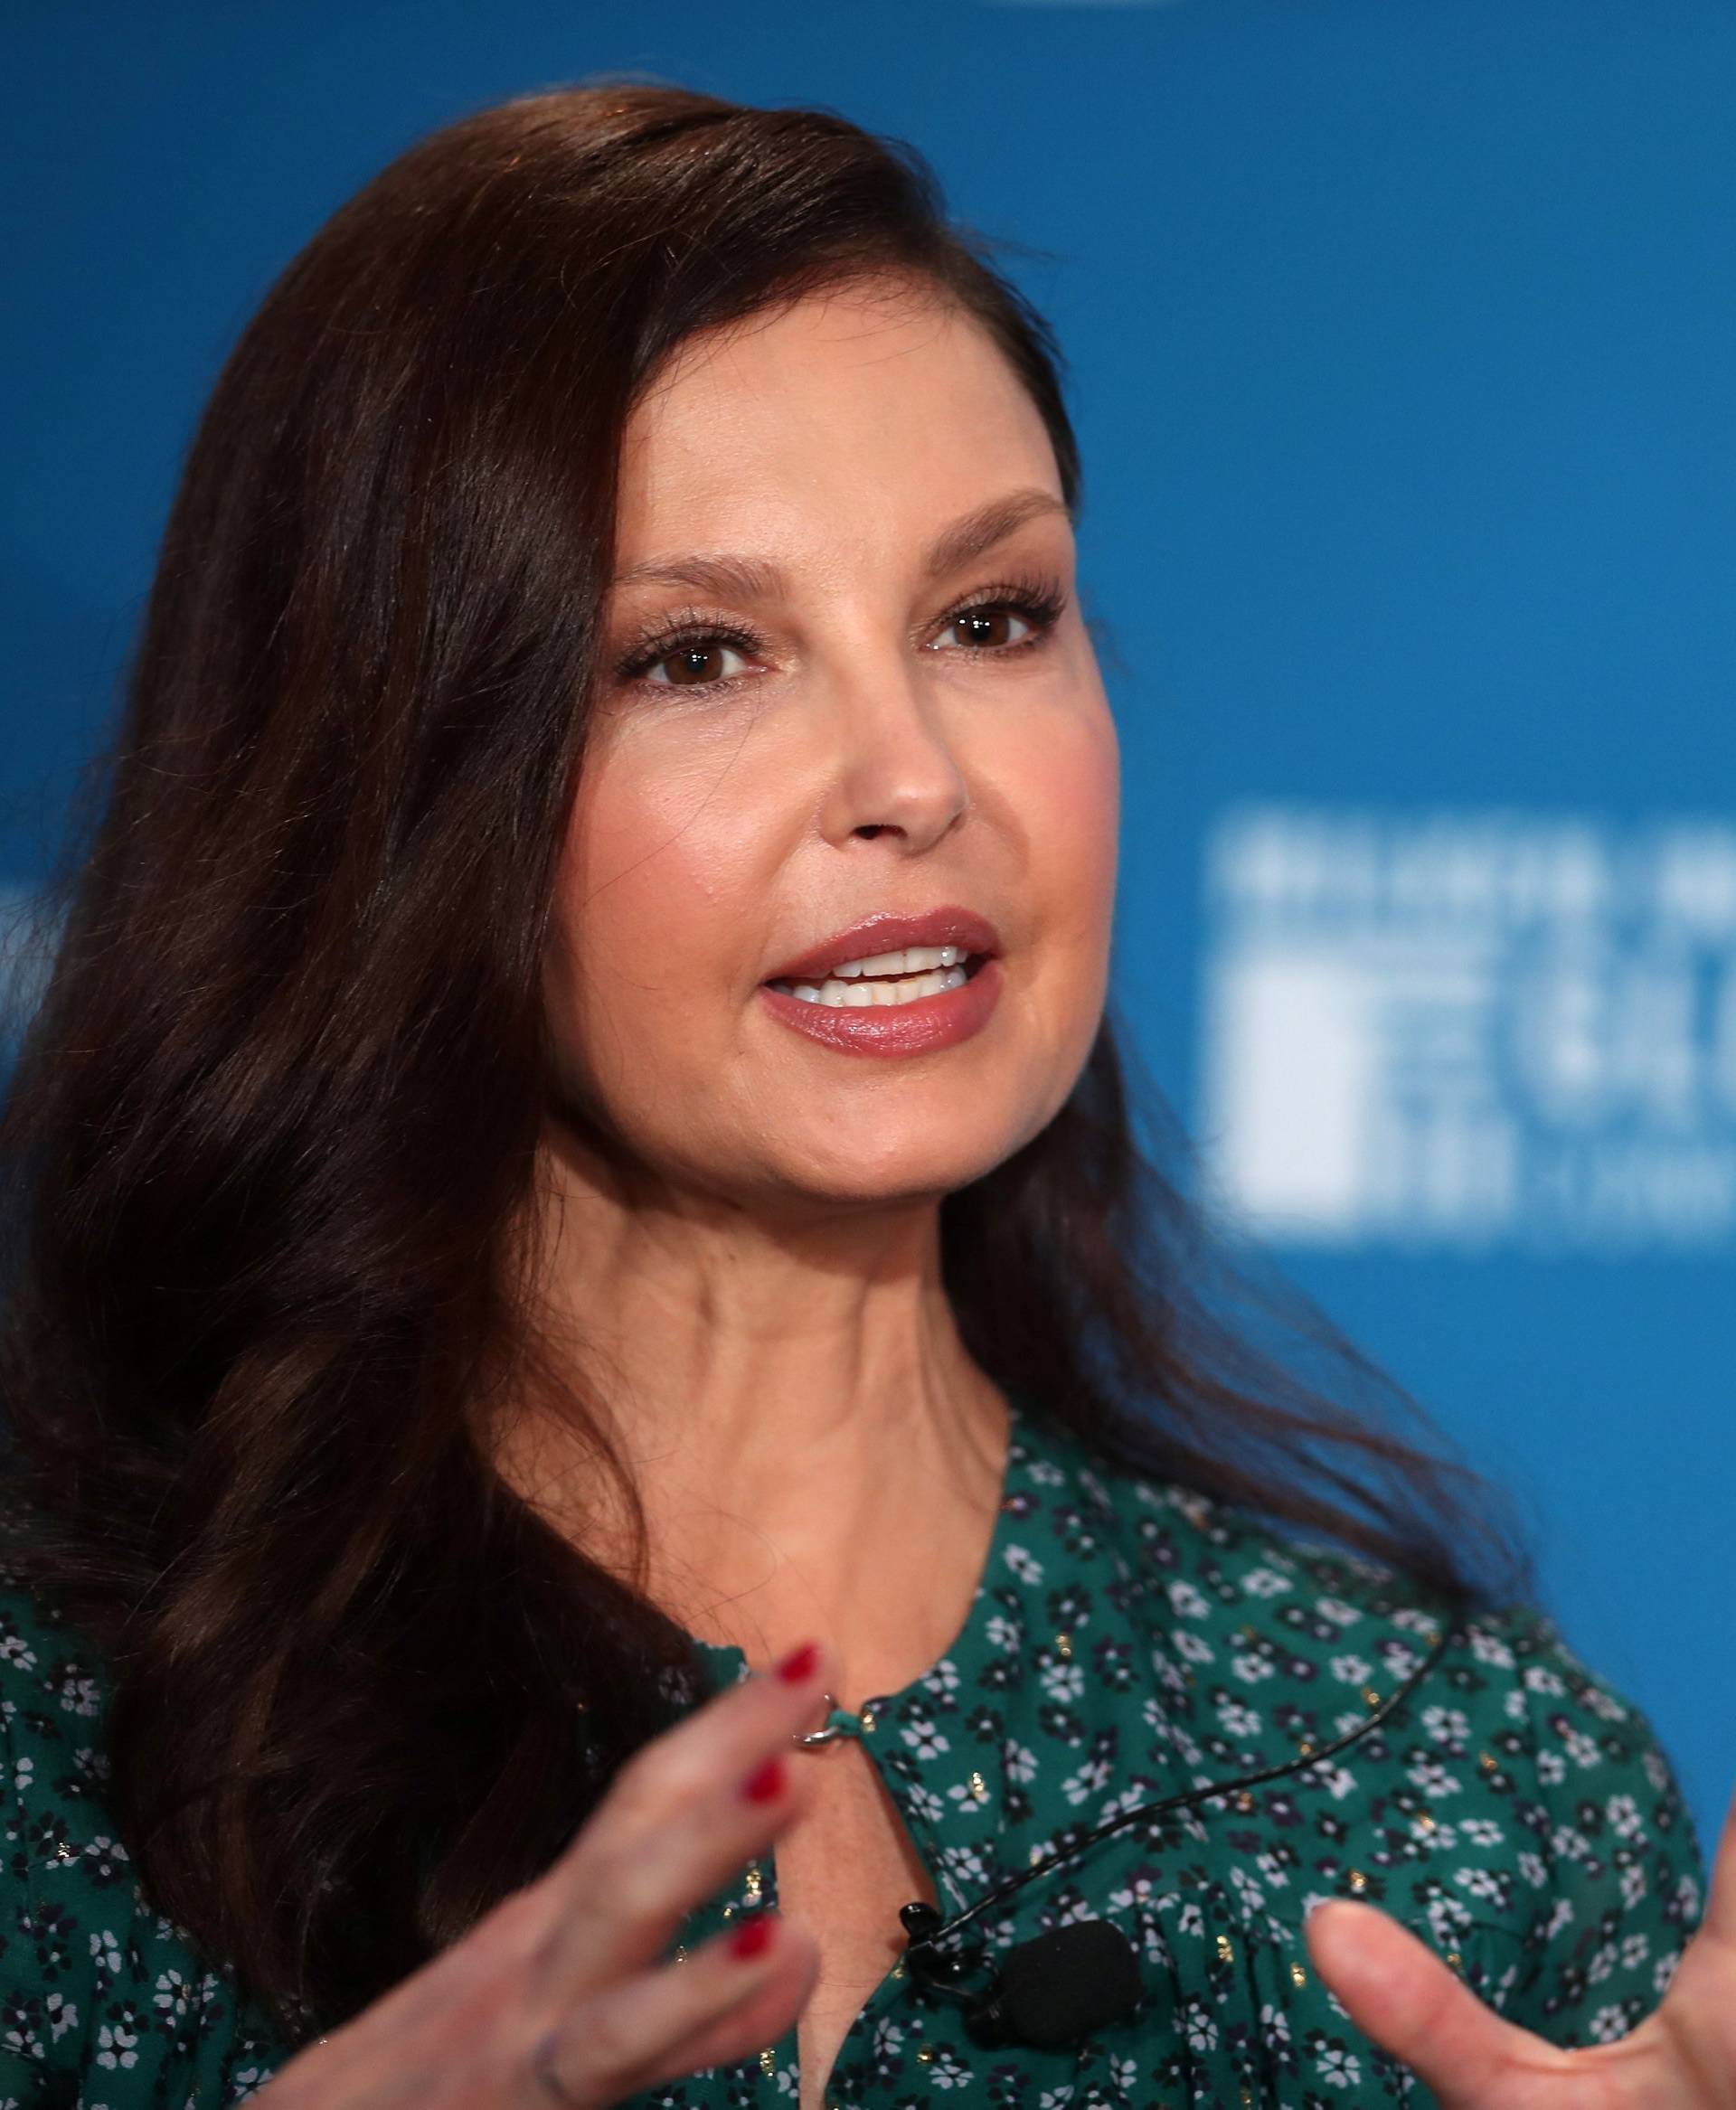 Actress Ashley Judd speaks at the Milken Institute's 21st Global Conference in Beverly Hills